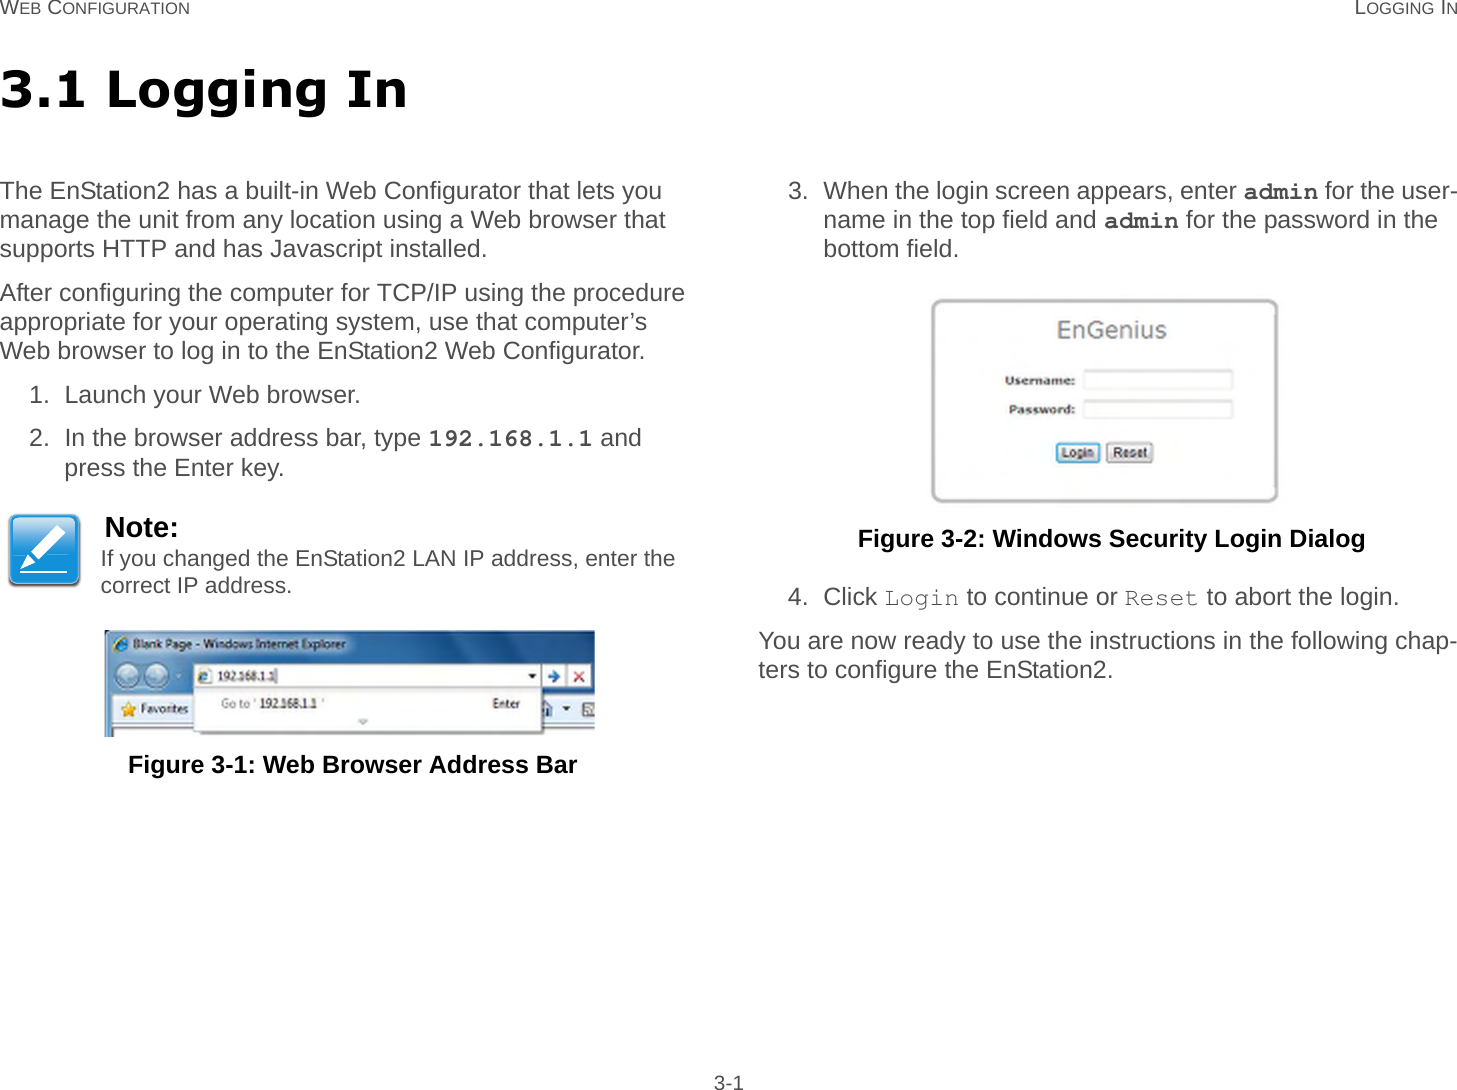 WEB CONFIGURATION LOGGING IN 3-13.1 Logging InThe EnStation2 has a built-in Web Configurator that lets you   manage the unit from any location using a Web browser that supports HTTP and has Javascript installed.After configuring the computer for TCP/IP using the procedure appropriate for your operating system, use that computer’s Web browser to log in to the EnStation2 Web Configurator.1. Launch your Web browser.2. In the browser address bar, type 192.168.1.1 and press the Enter key. Figure 3-1: Web Browser Address Bar3. When the login screen appears, enter admin for the user-name in the top field and admin for the password in the bottom field. Figure 3-2: Windows Security Login Dialog4. Click Login to continue or Reset to abort the login.You are now ready to use the instructions in the following chap-ters to configure the EnStation2.Note:If you changed the EnStation2 LAN IP address, enter the correct IP address.